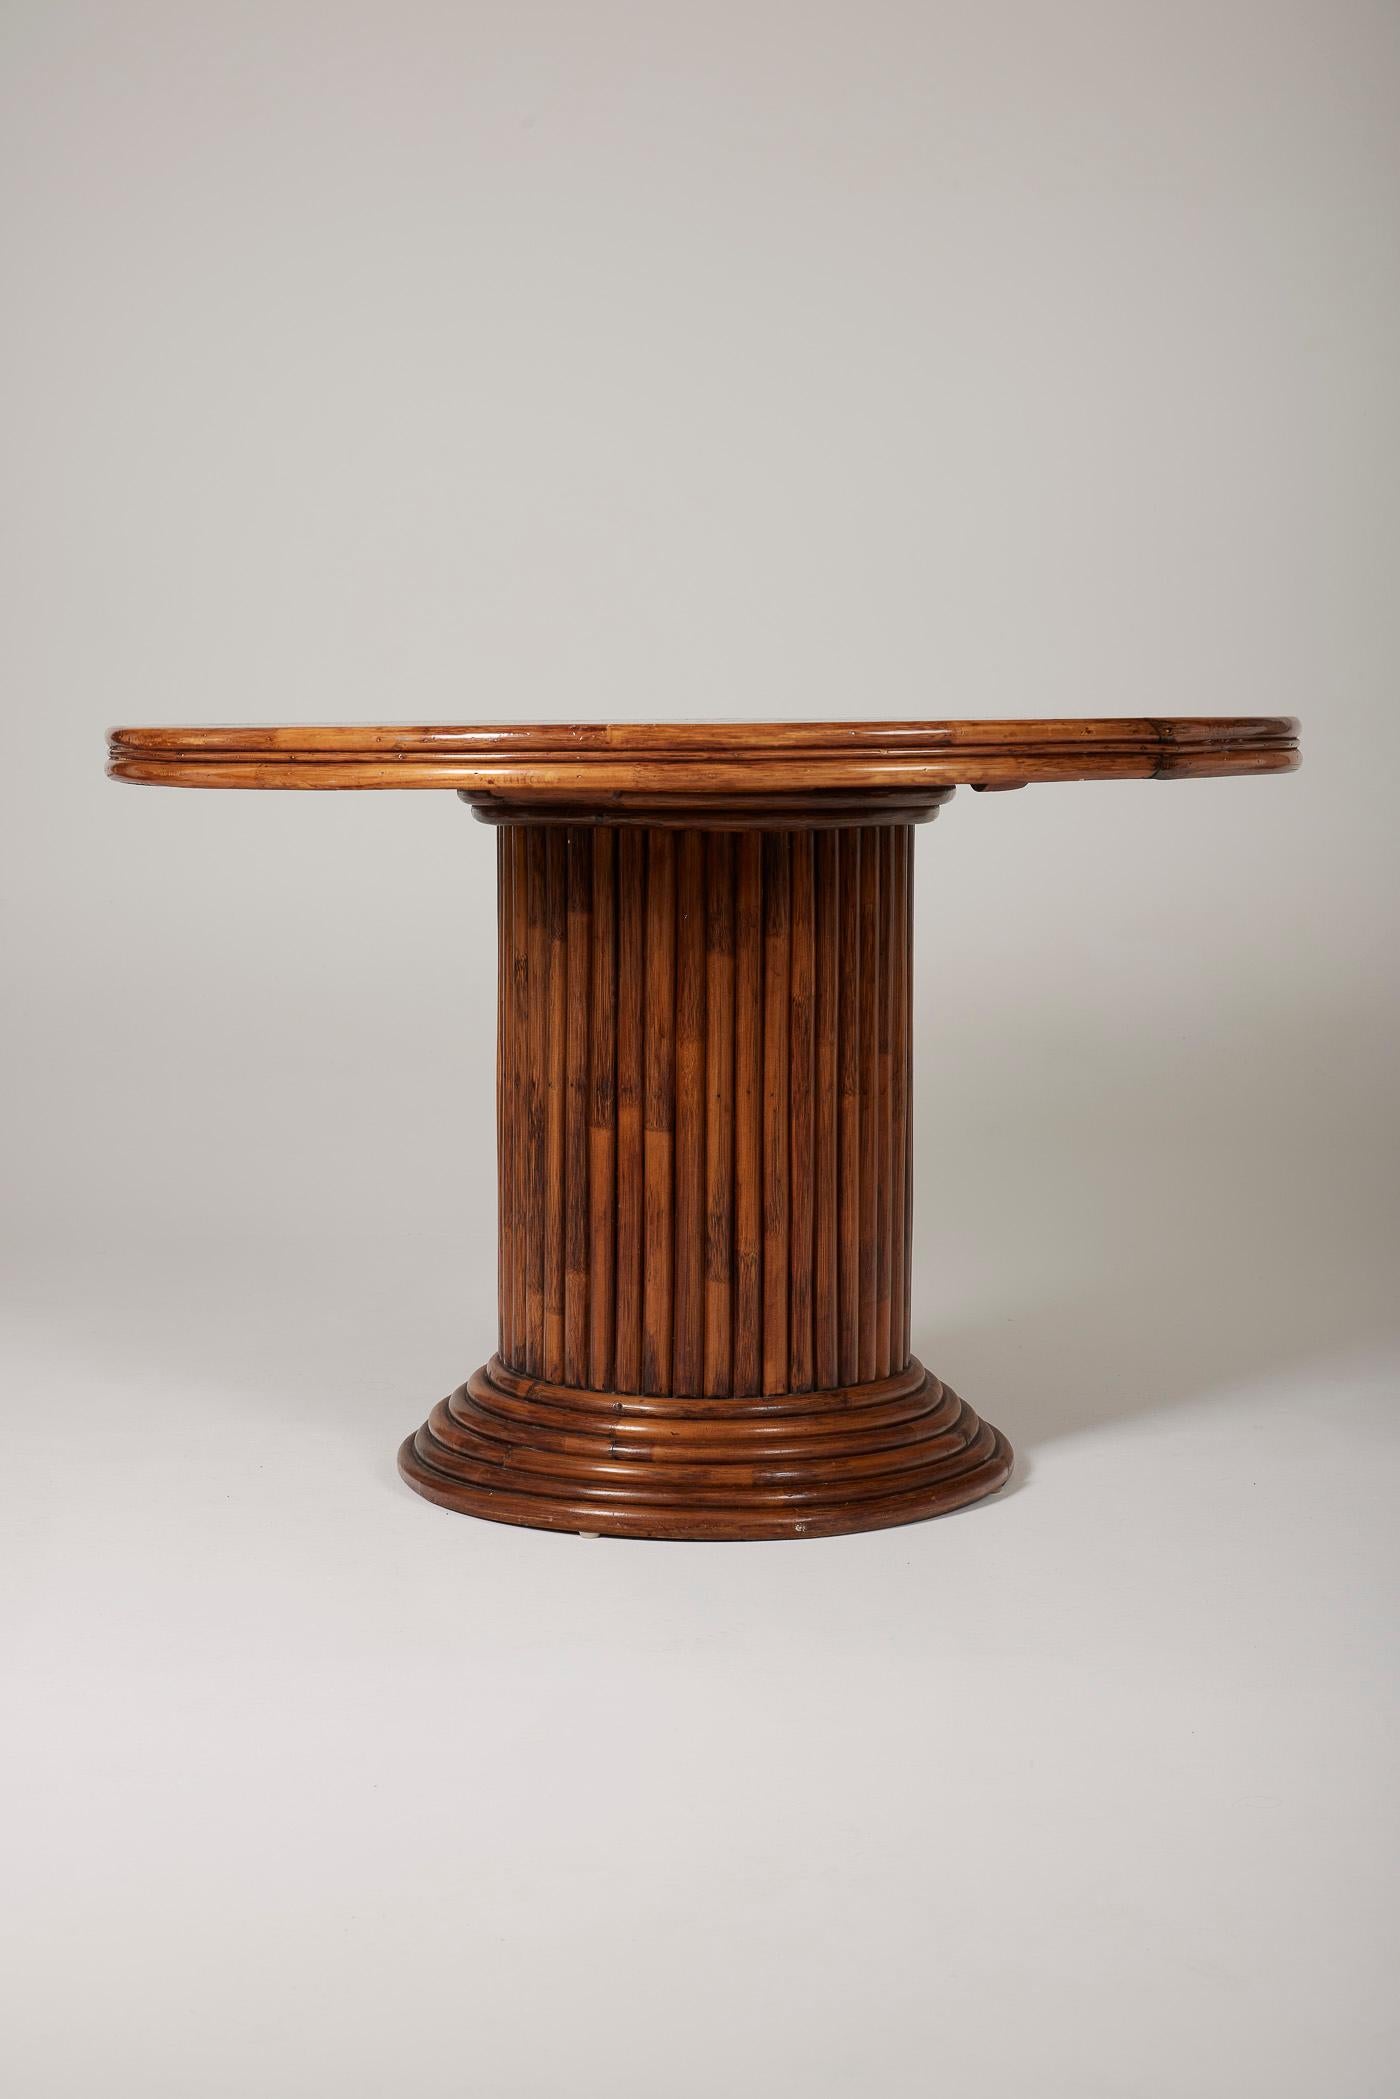 Brutalist French wood and bamboo dining table